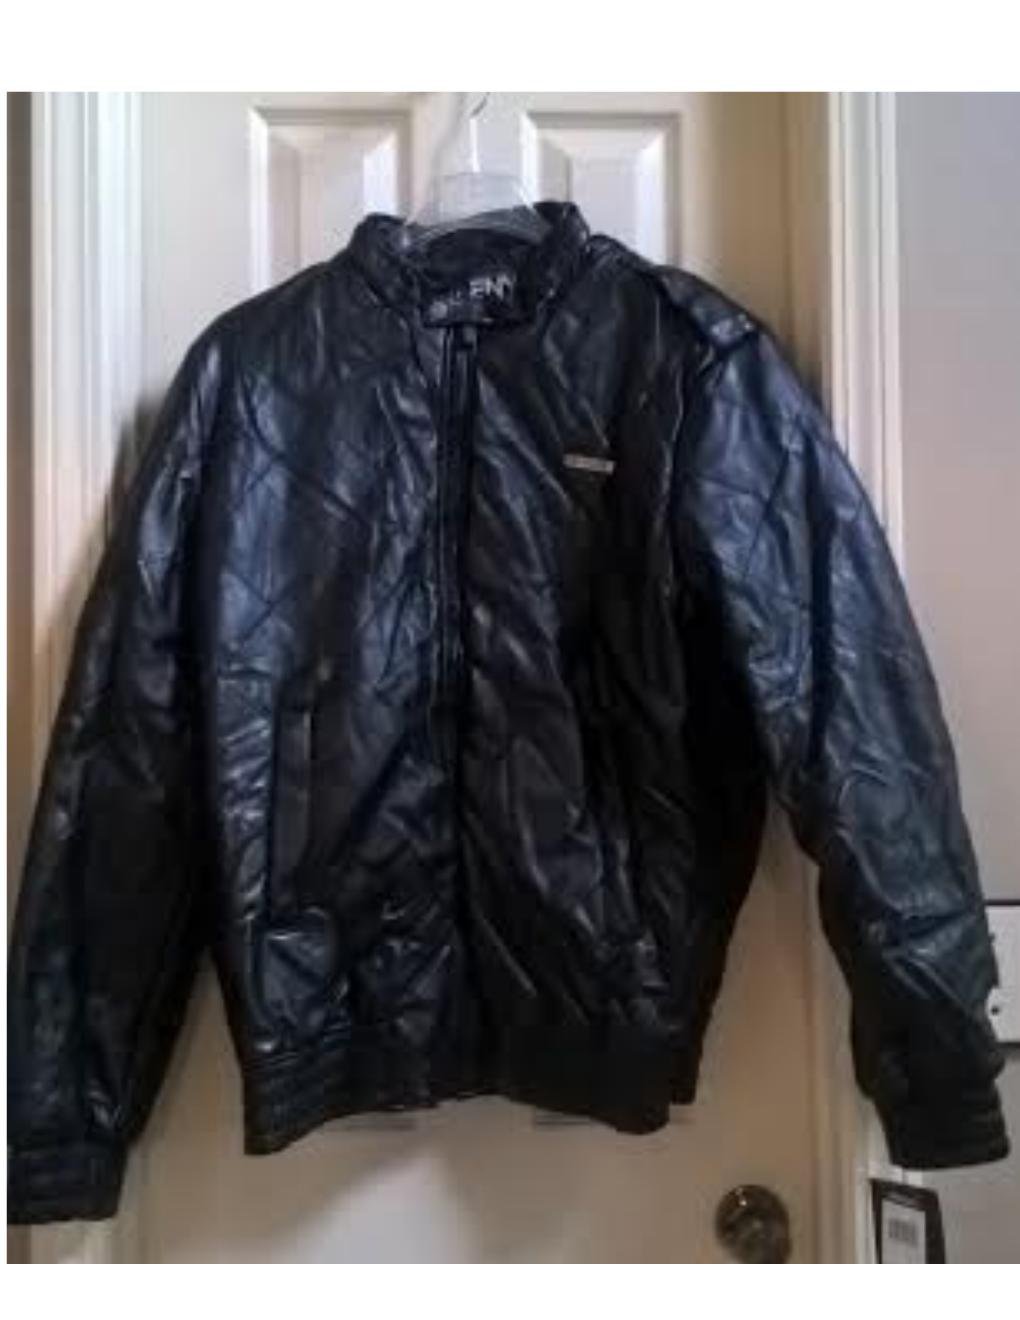 NEW Men's Extra Large XL Enyce Black Bomber Jacket Faux Leather